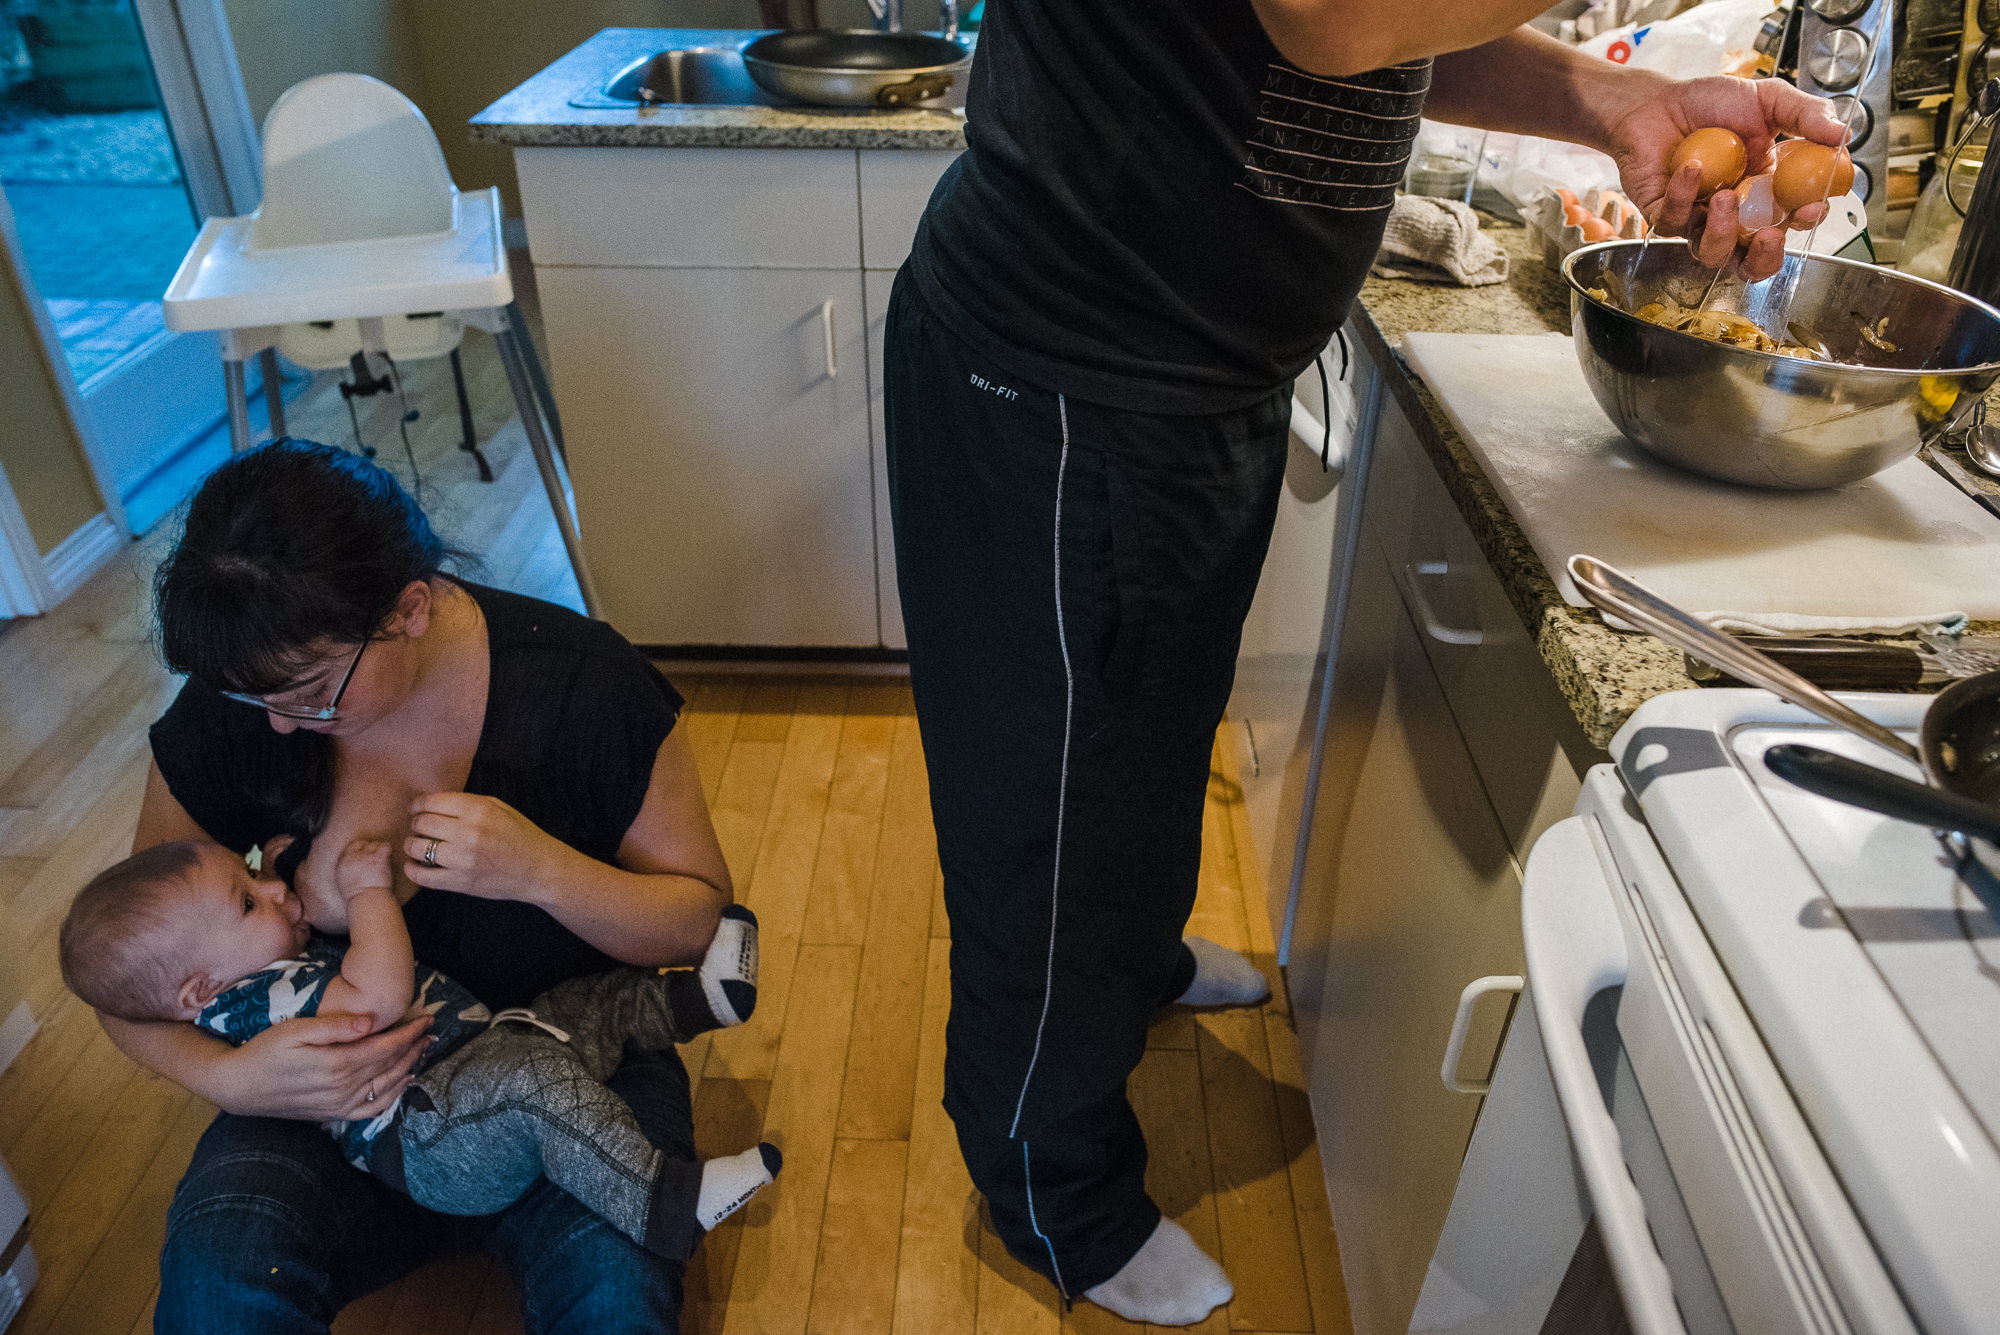 mom breastfeeding baby on the kitchen floor while dad is cooking